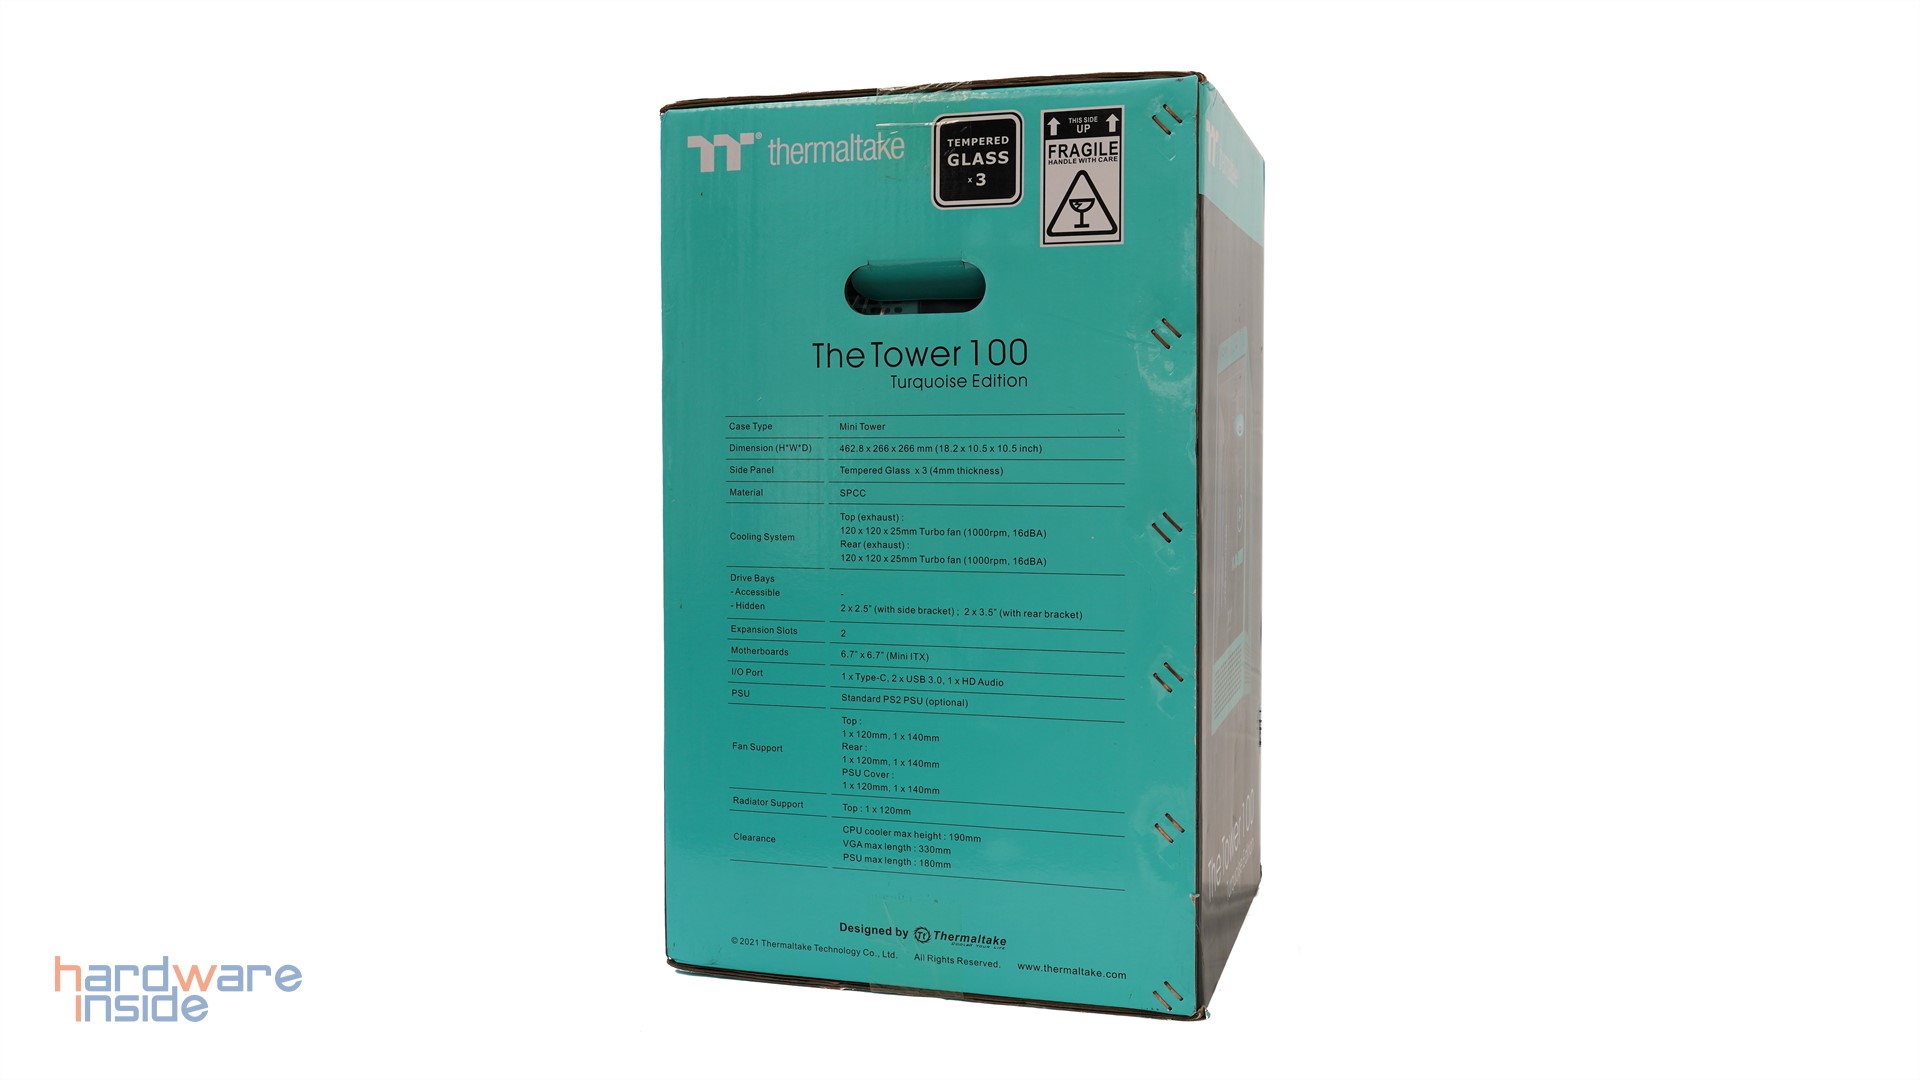 thermaltake-the-tower-100-turquoise-mini-verpackung-seite.JPG